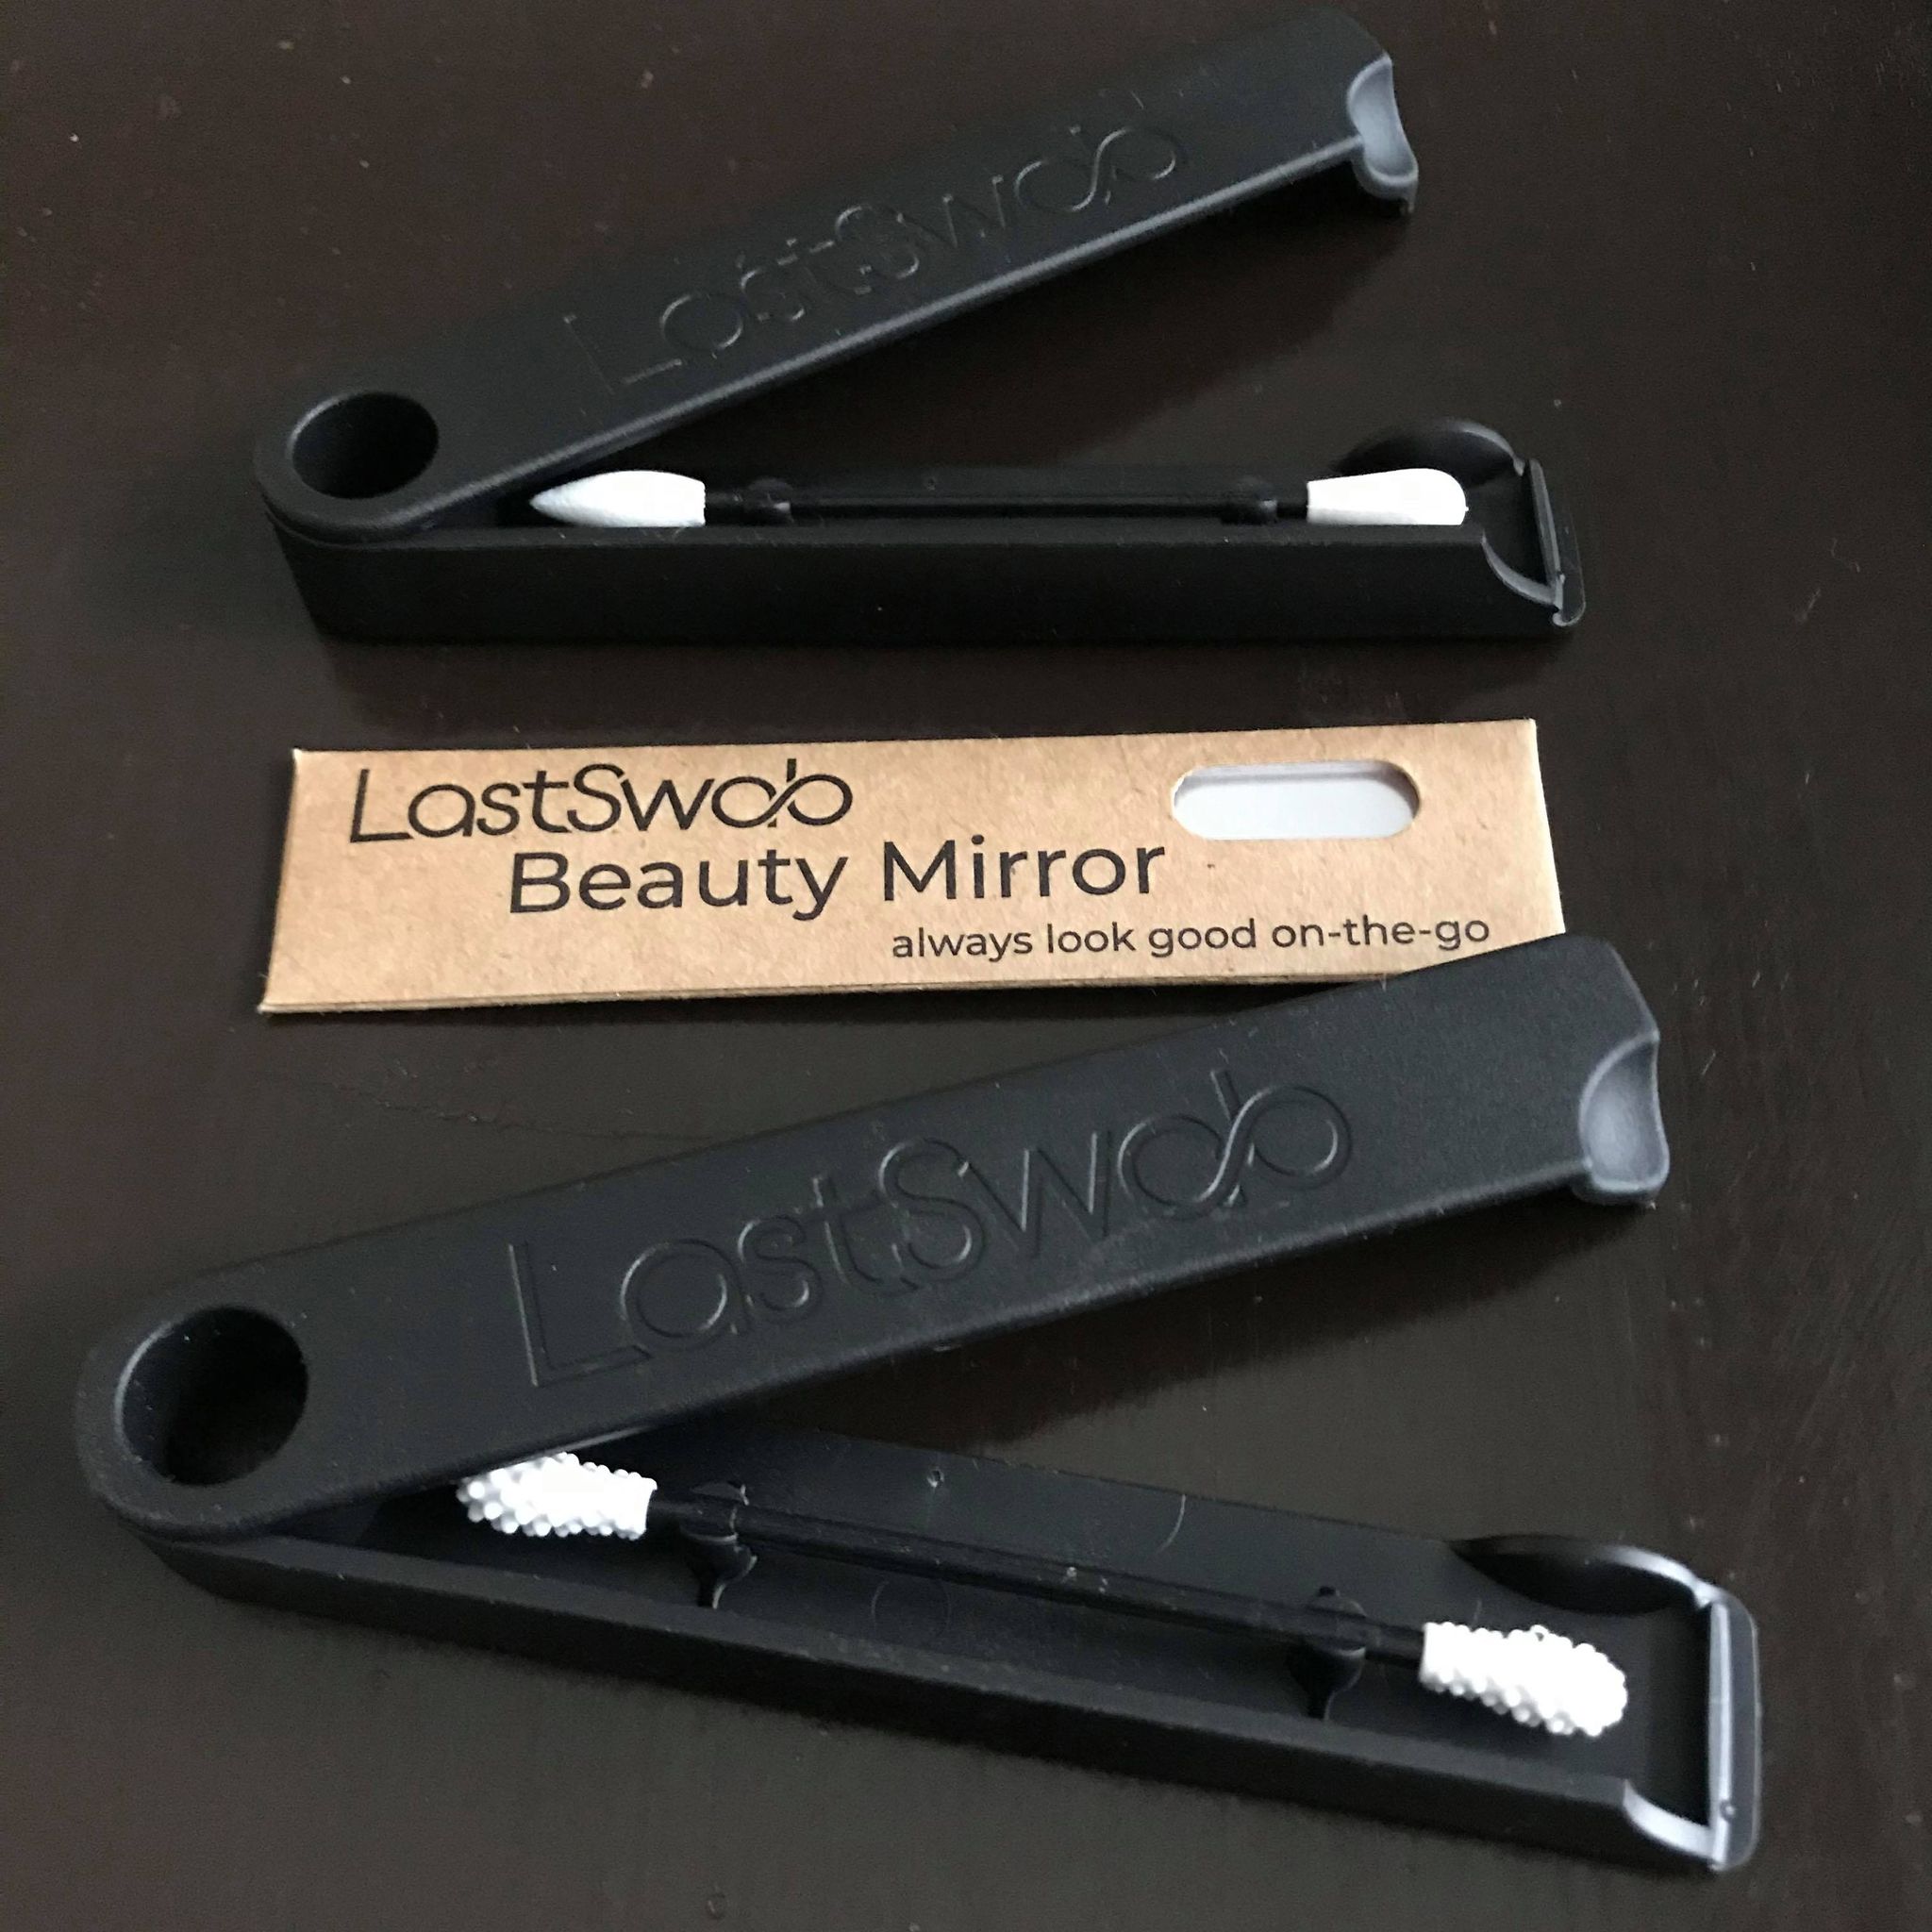 Last Swab regular and beauty style reusable cotton swabs in black cases with an add on beauty mirror option